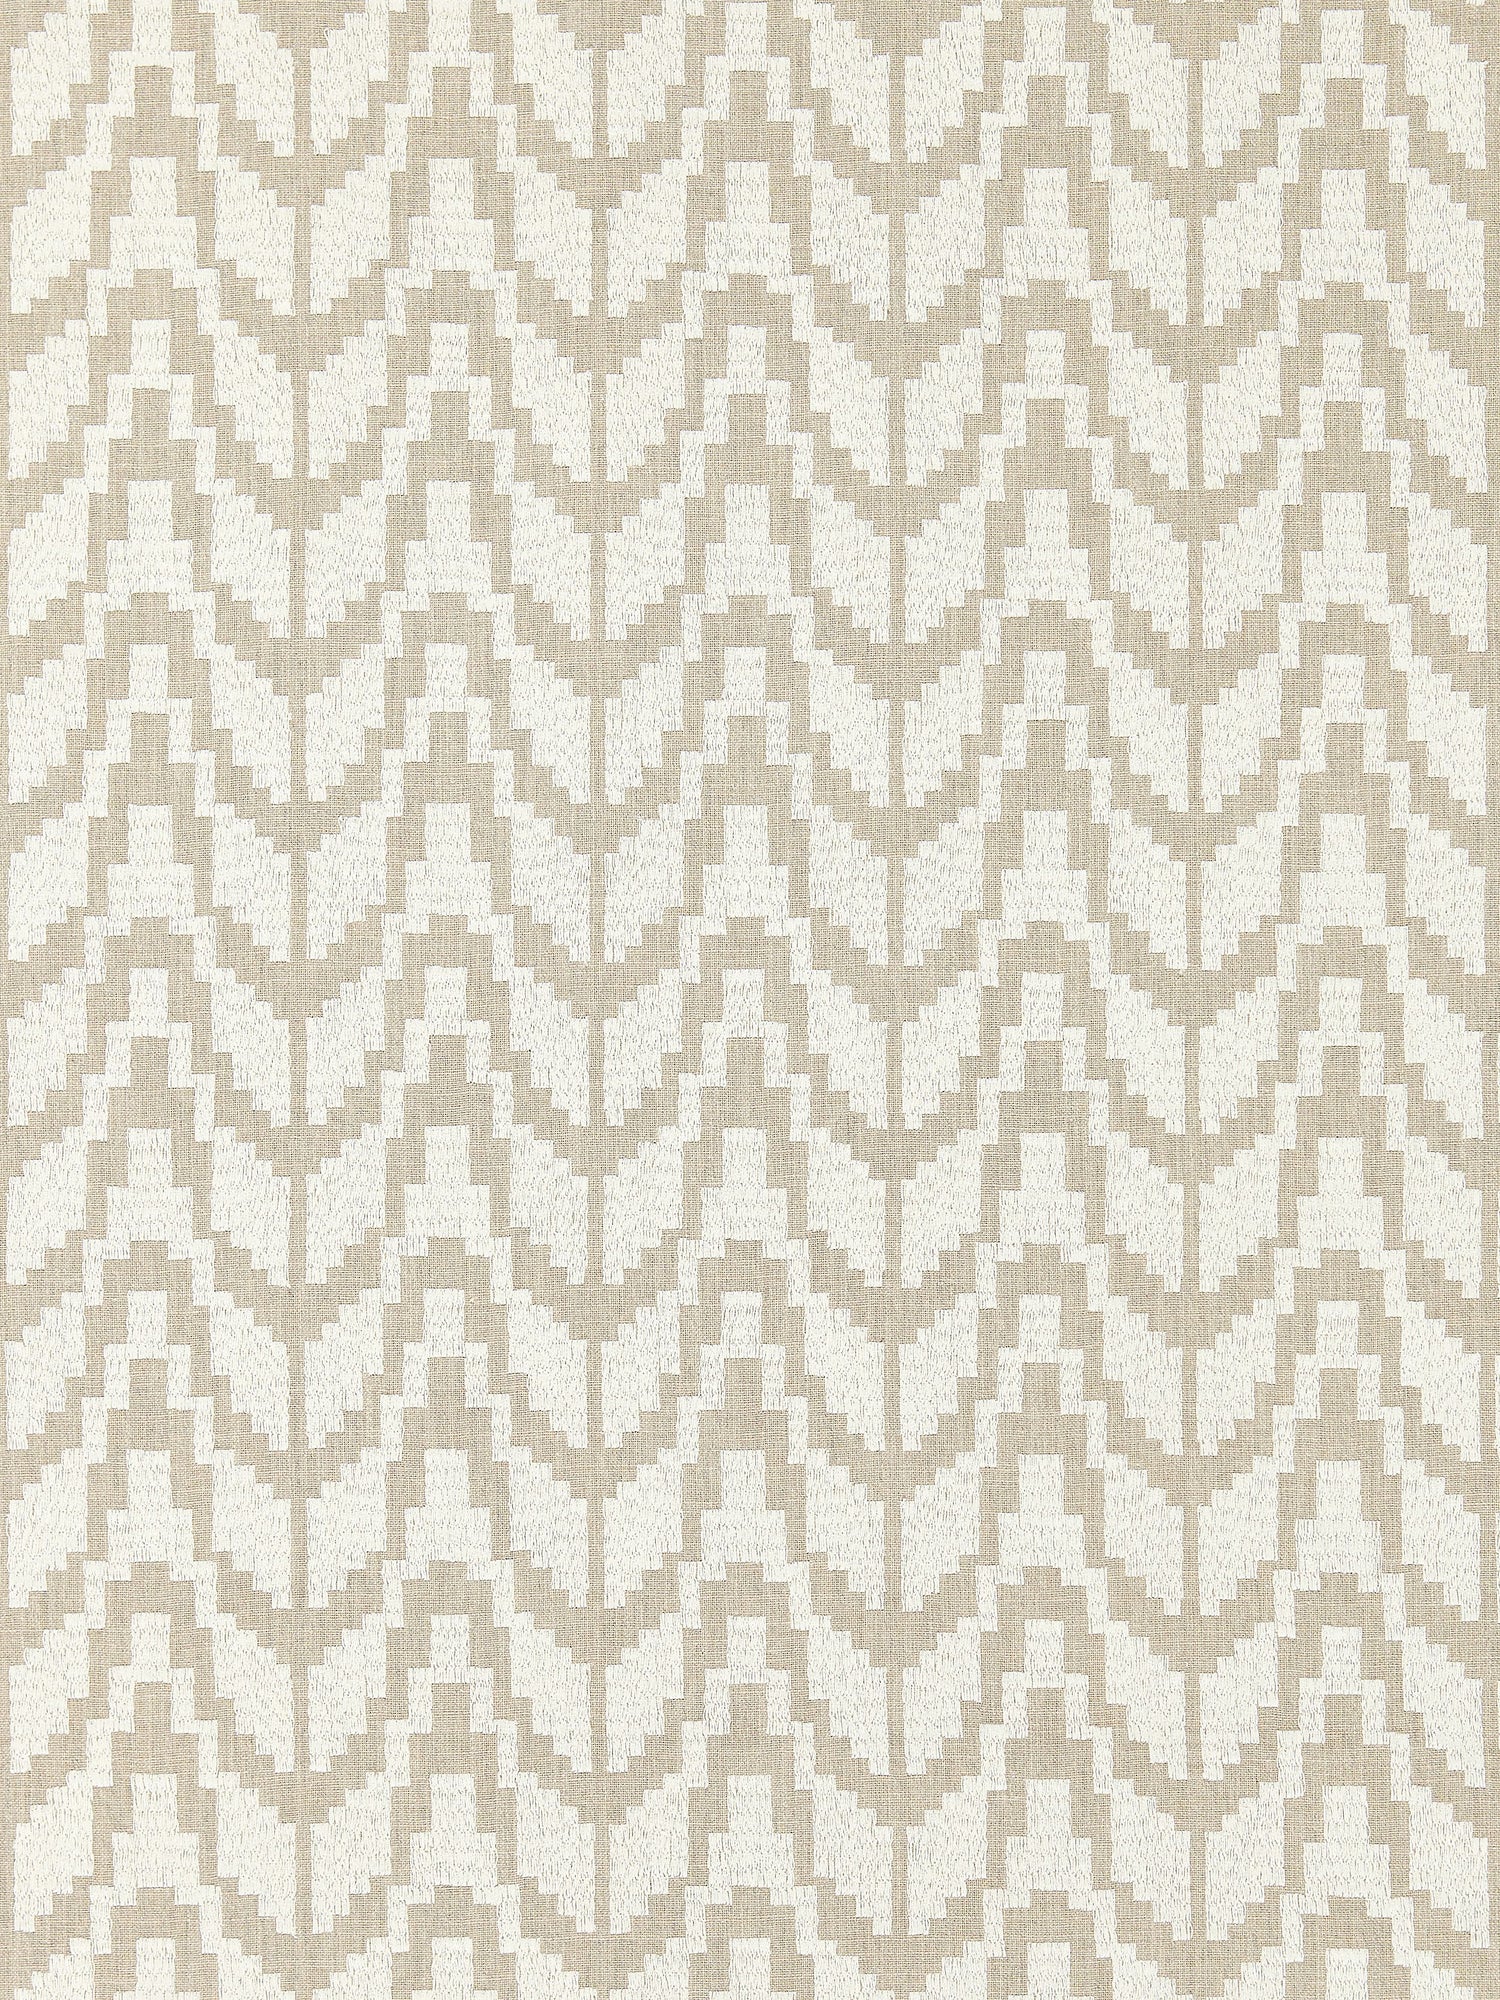 Chevron Embroidery fabric in flax color - pattern number SC 000327103 - by Scalamandre in the Scalamandre Fabrics Book 1 collection